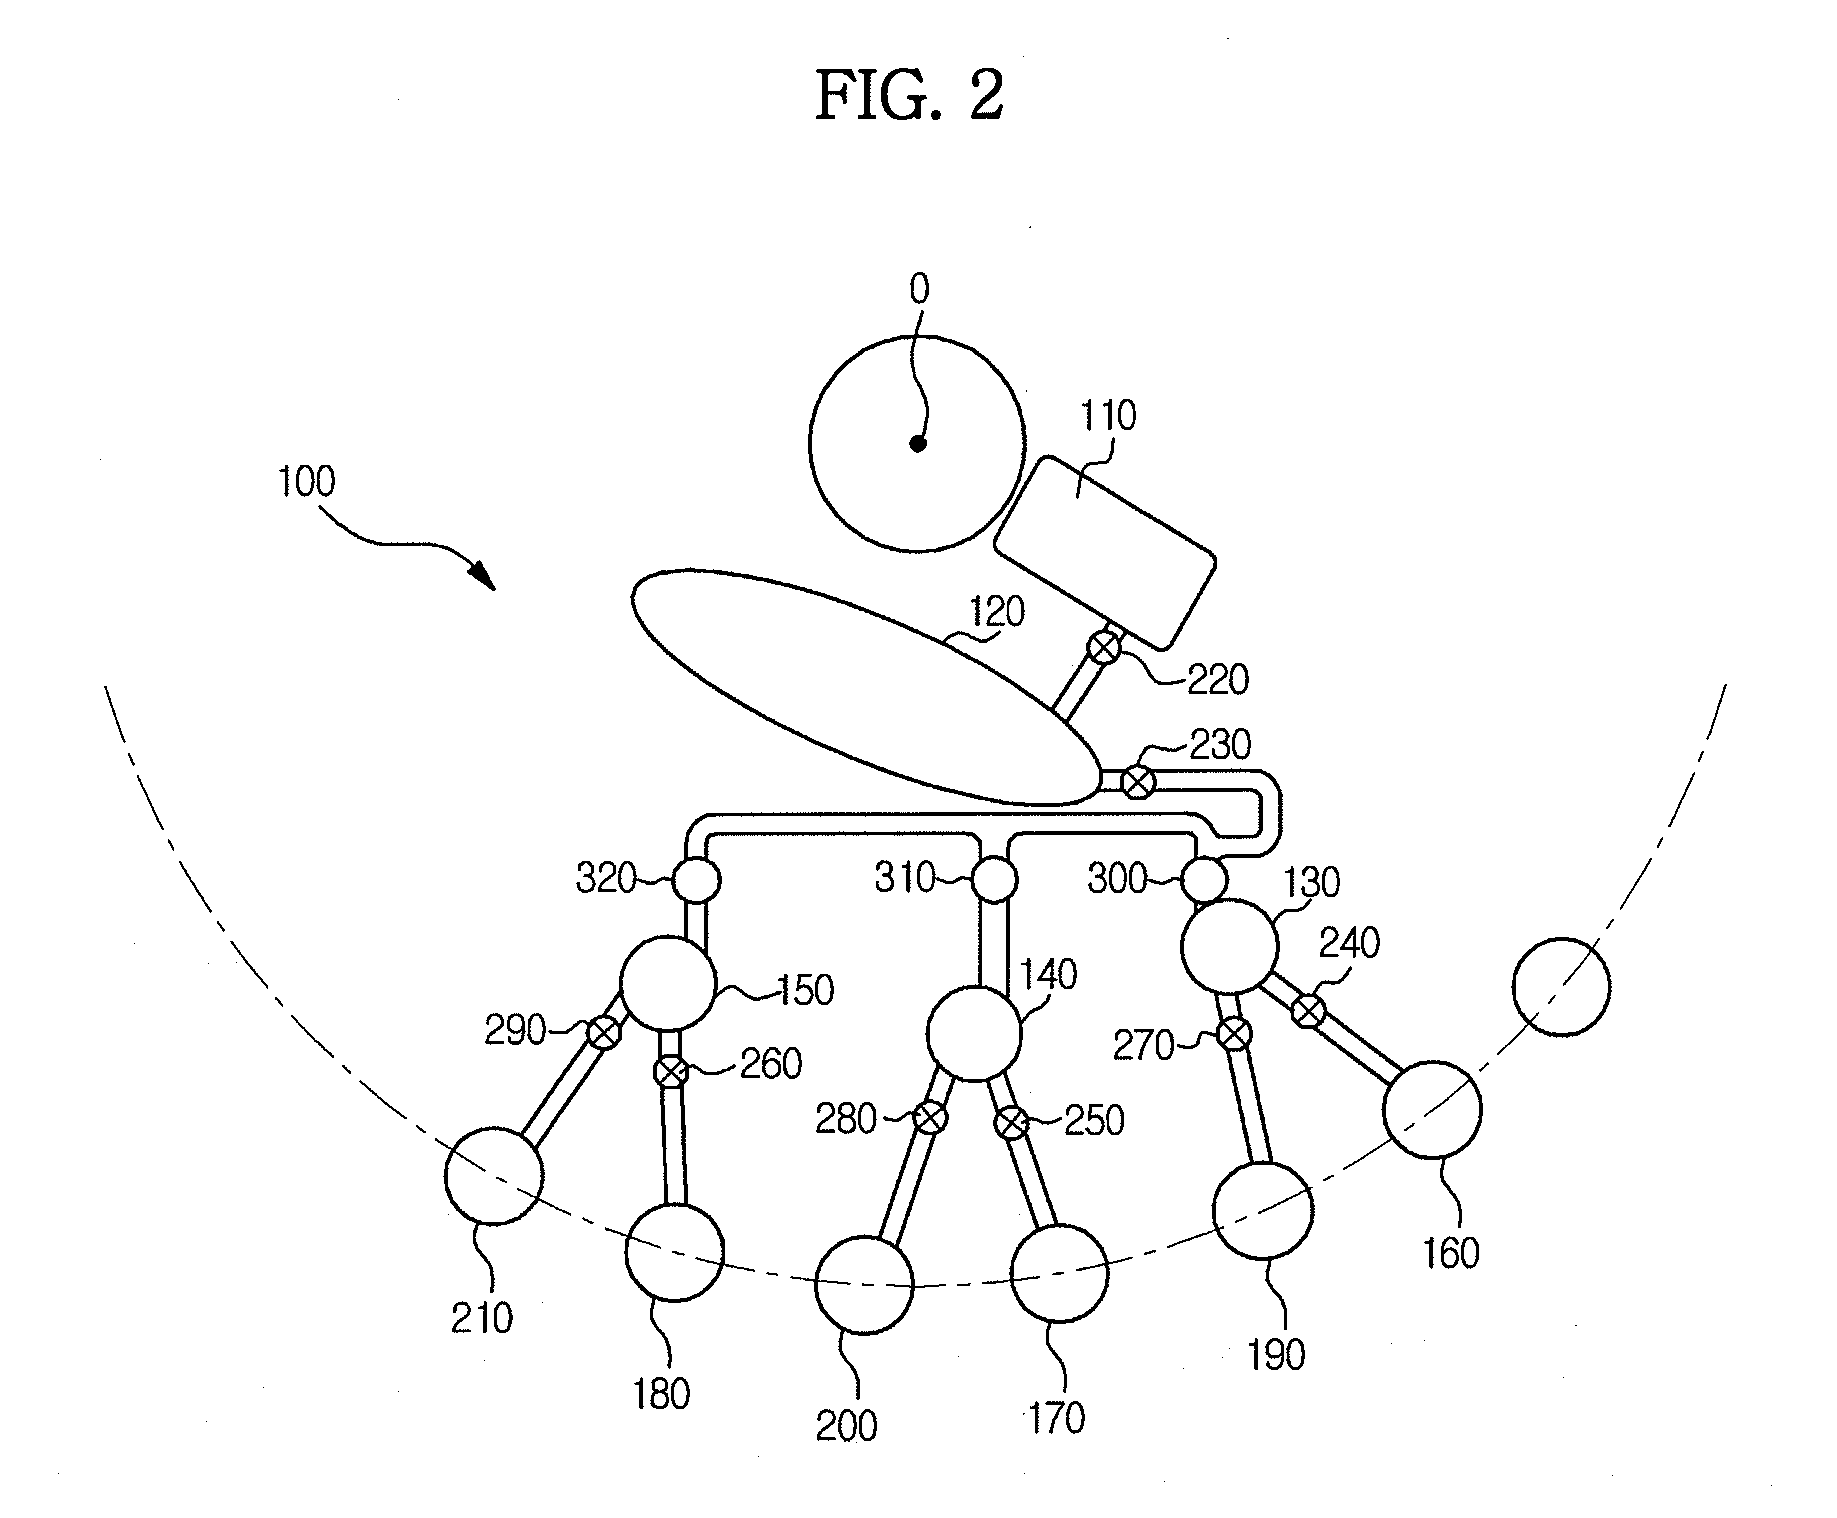 Centrifugal micro-fluidic structure for measuring glycated hemoglobin, centrifugal micro-fluidic device for measuring glycated hemoglobin, and method for measuring glycated hemoglobin